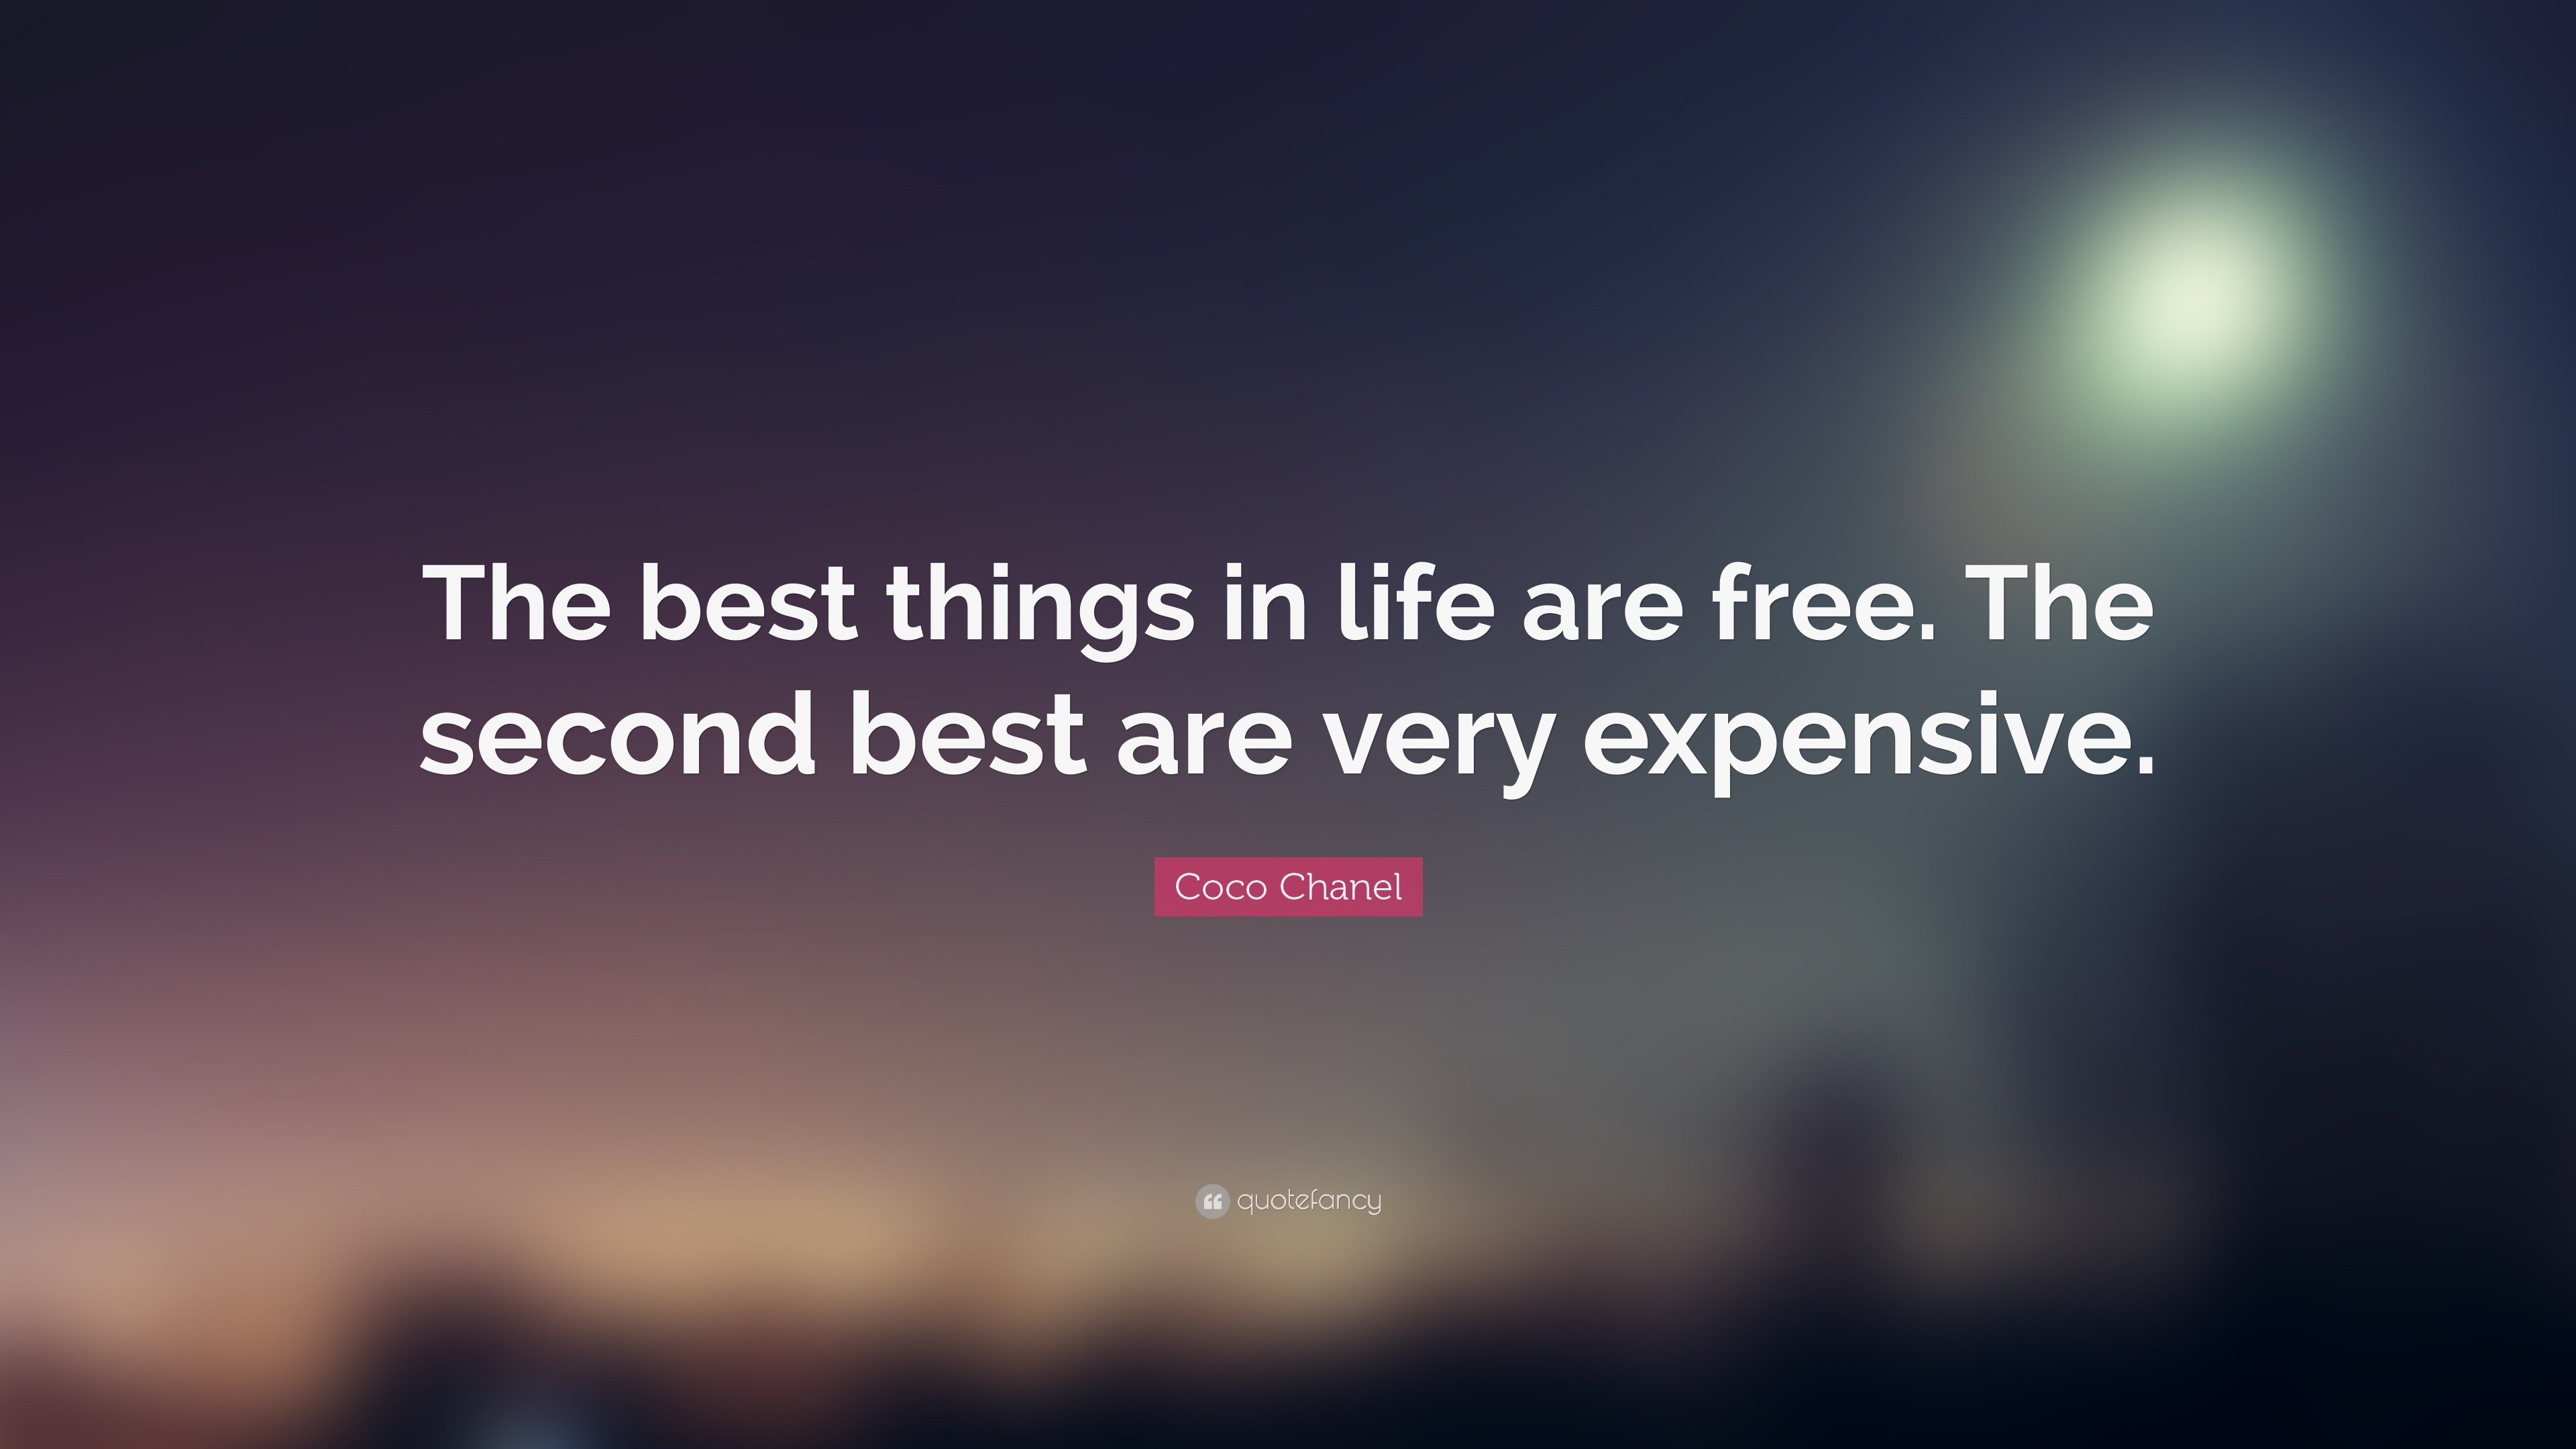 Coco Chanel Quote: “The best things in life are free. The second